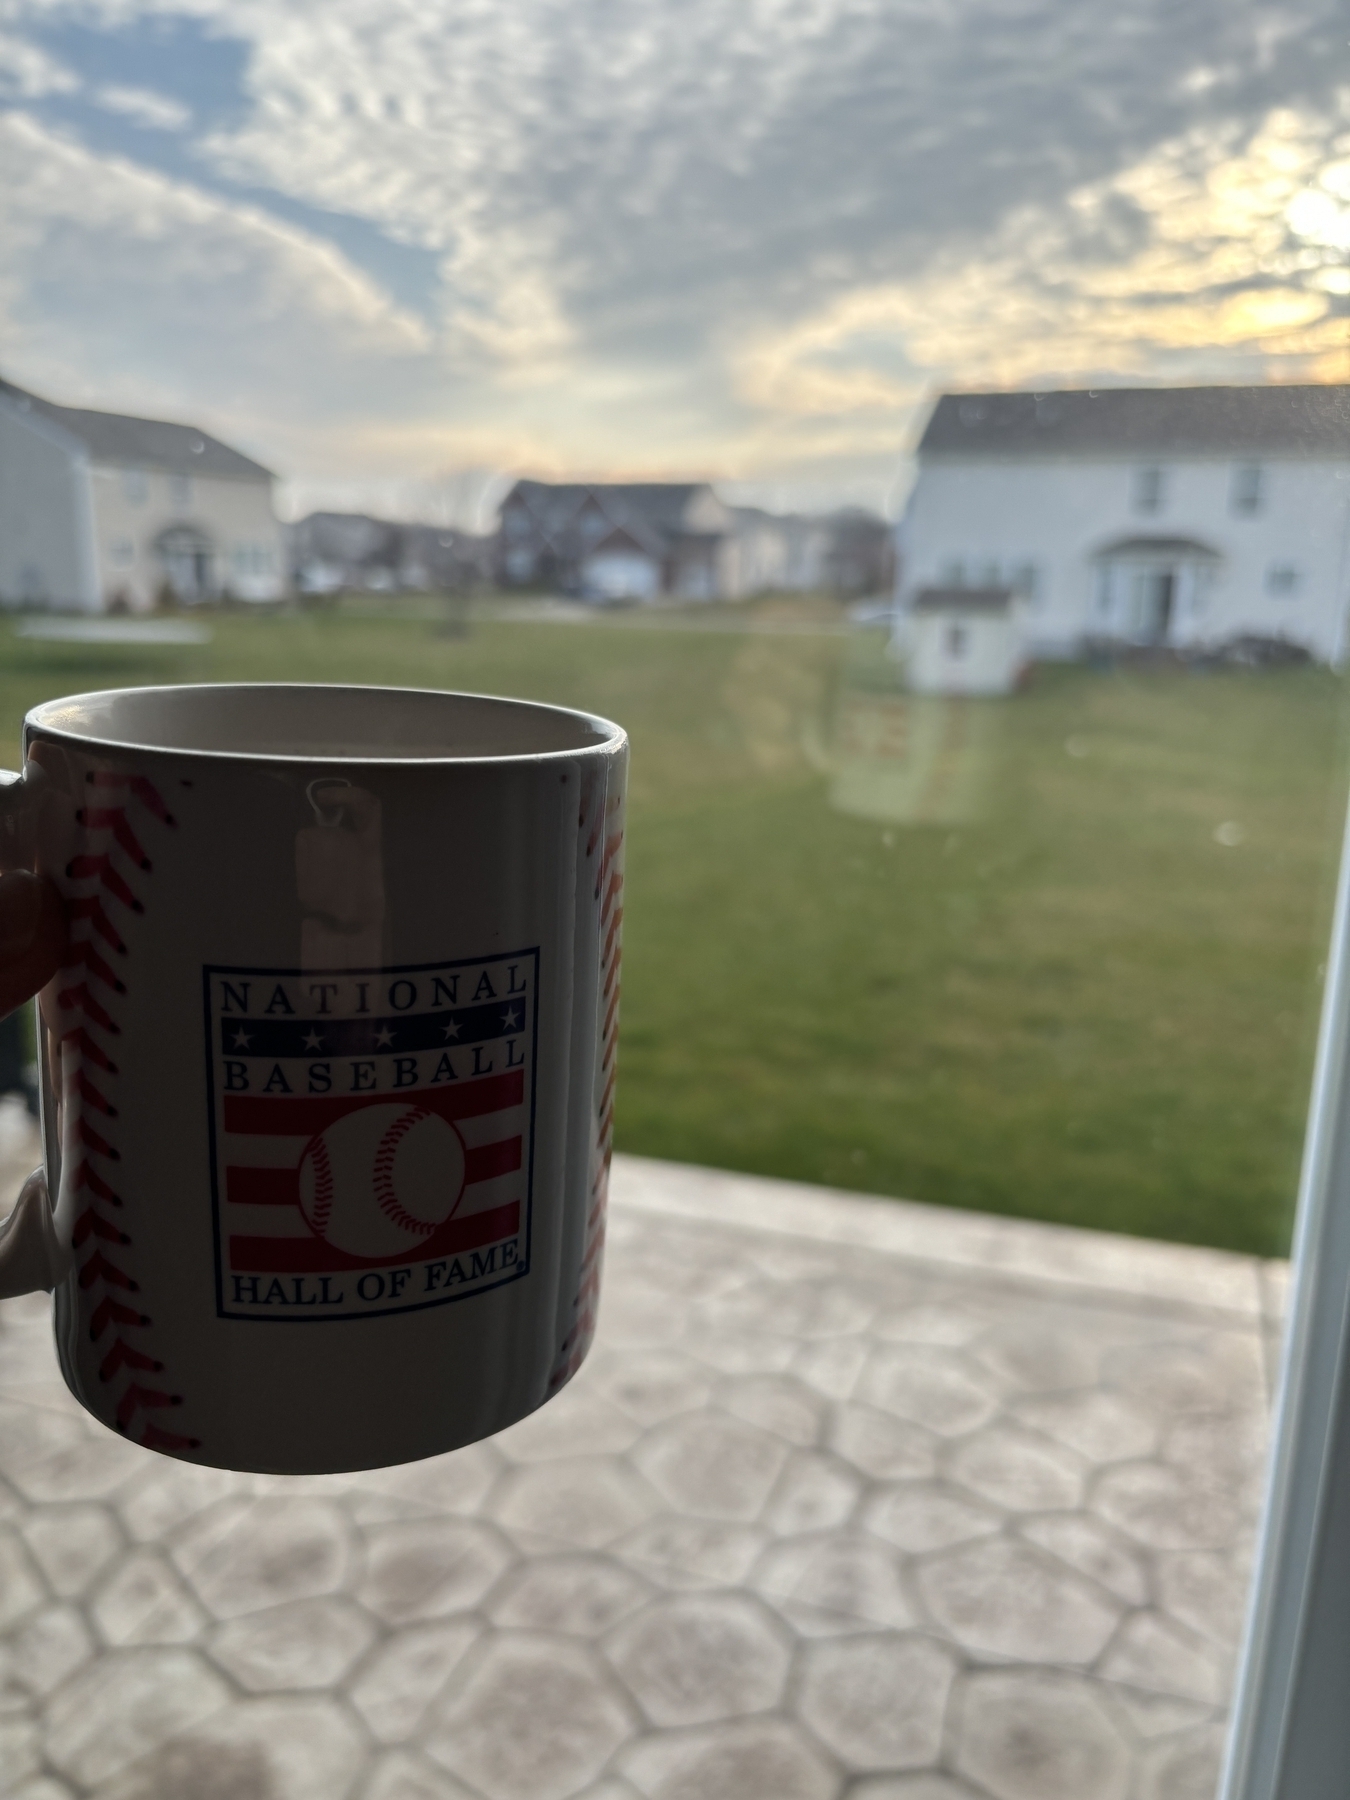 A coffee mug in front of  a window looking out onto a backyard and you can see a slight reflection in the window of the man holding the mug. 